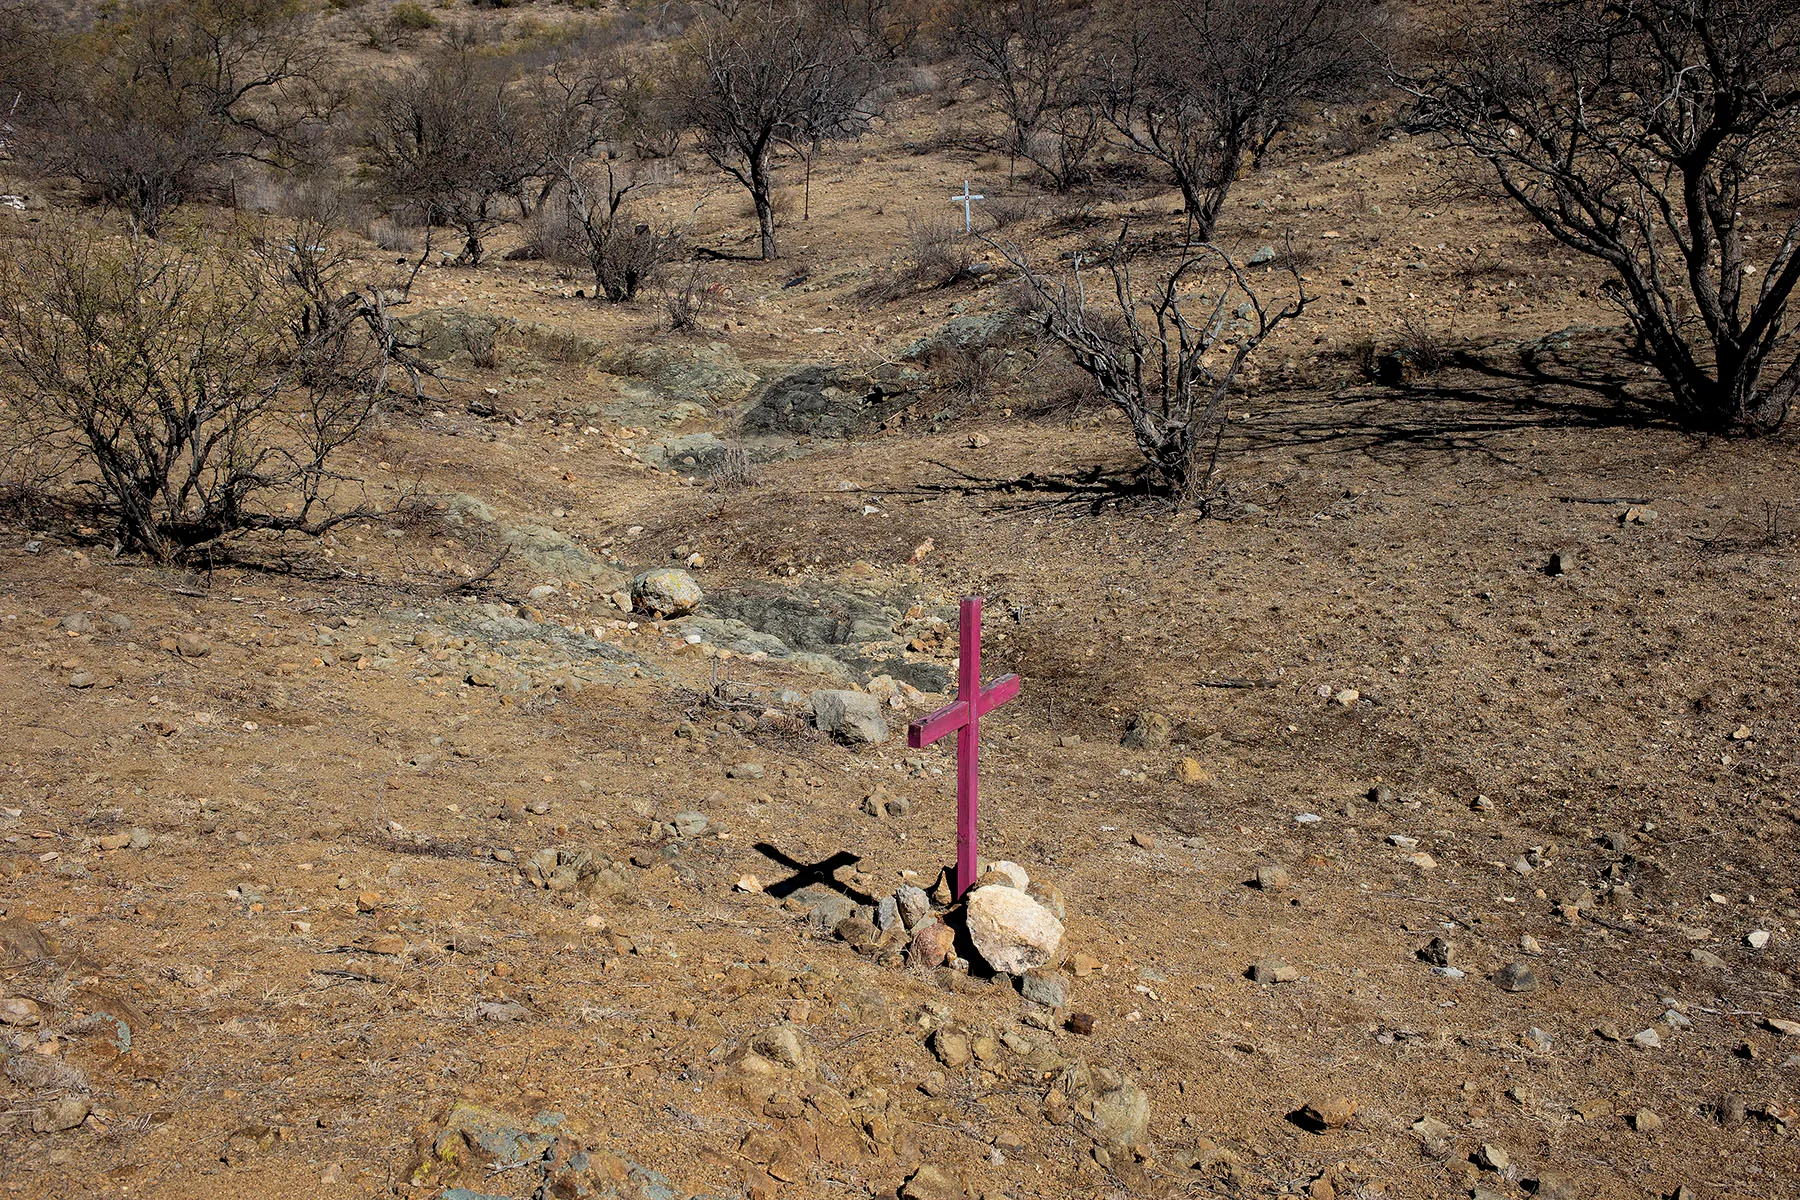 Crosses left by border activists are seen in the Altar Valley, Arizona.